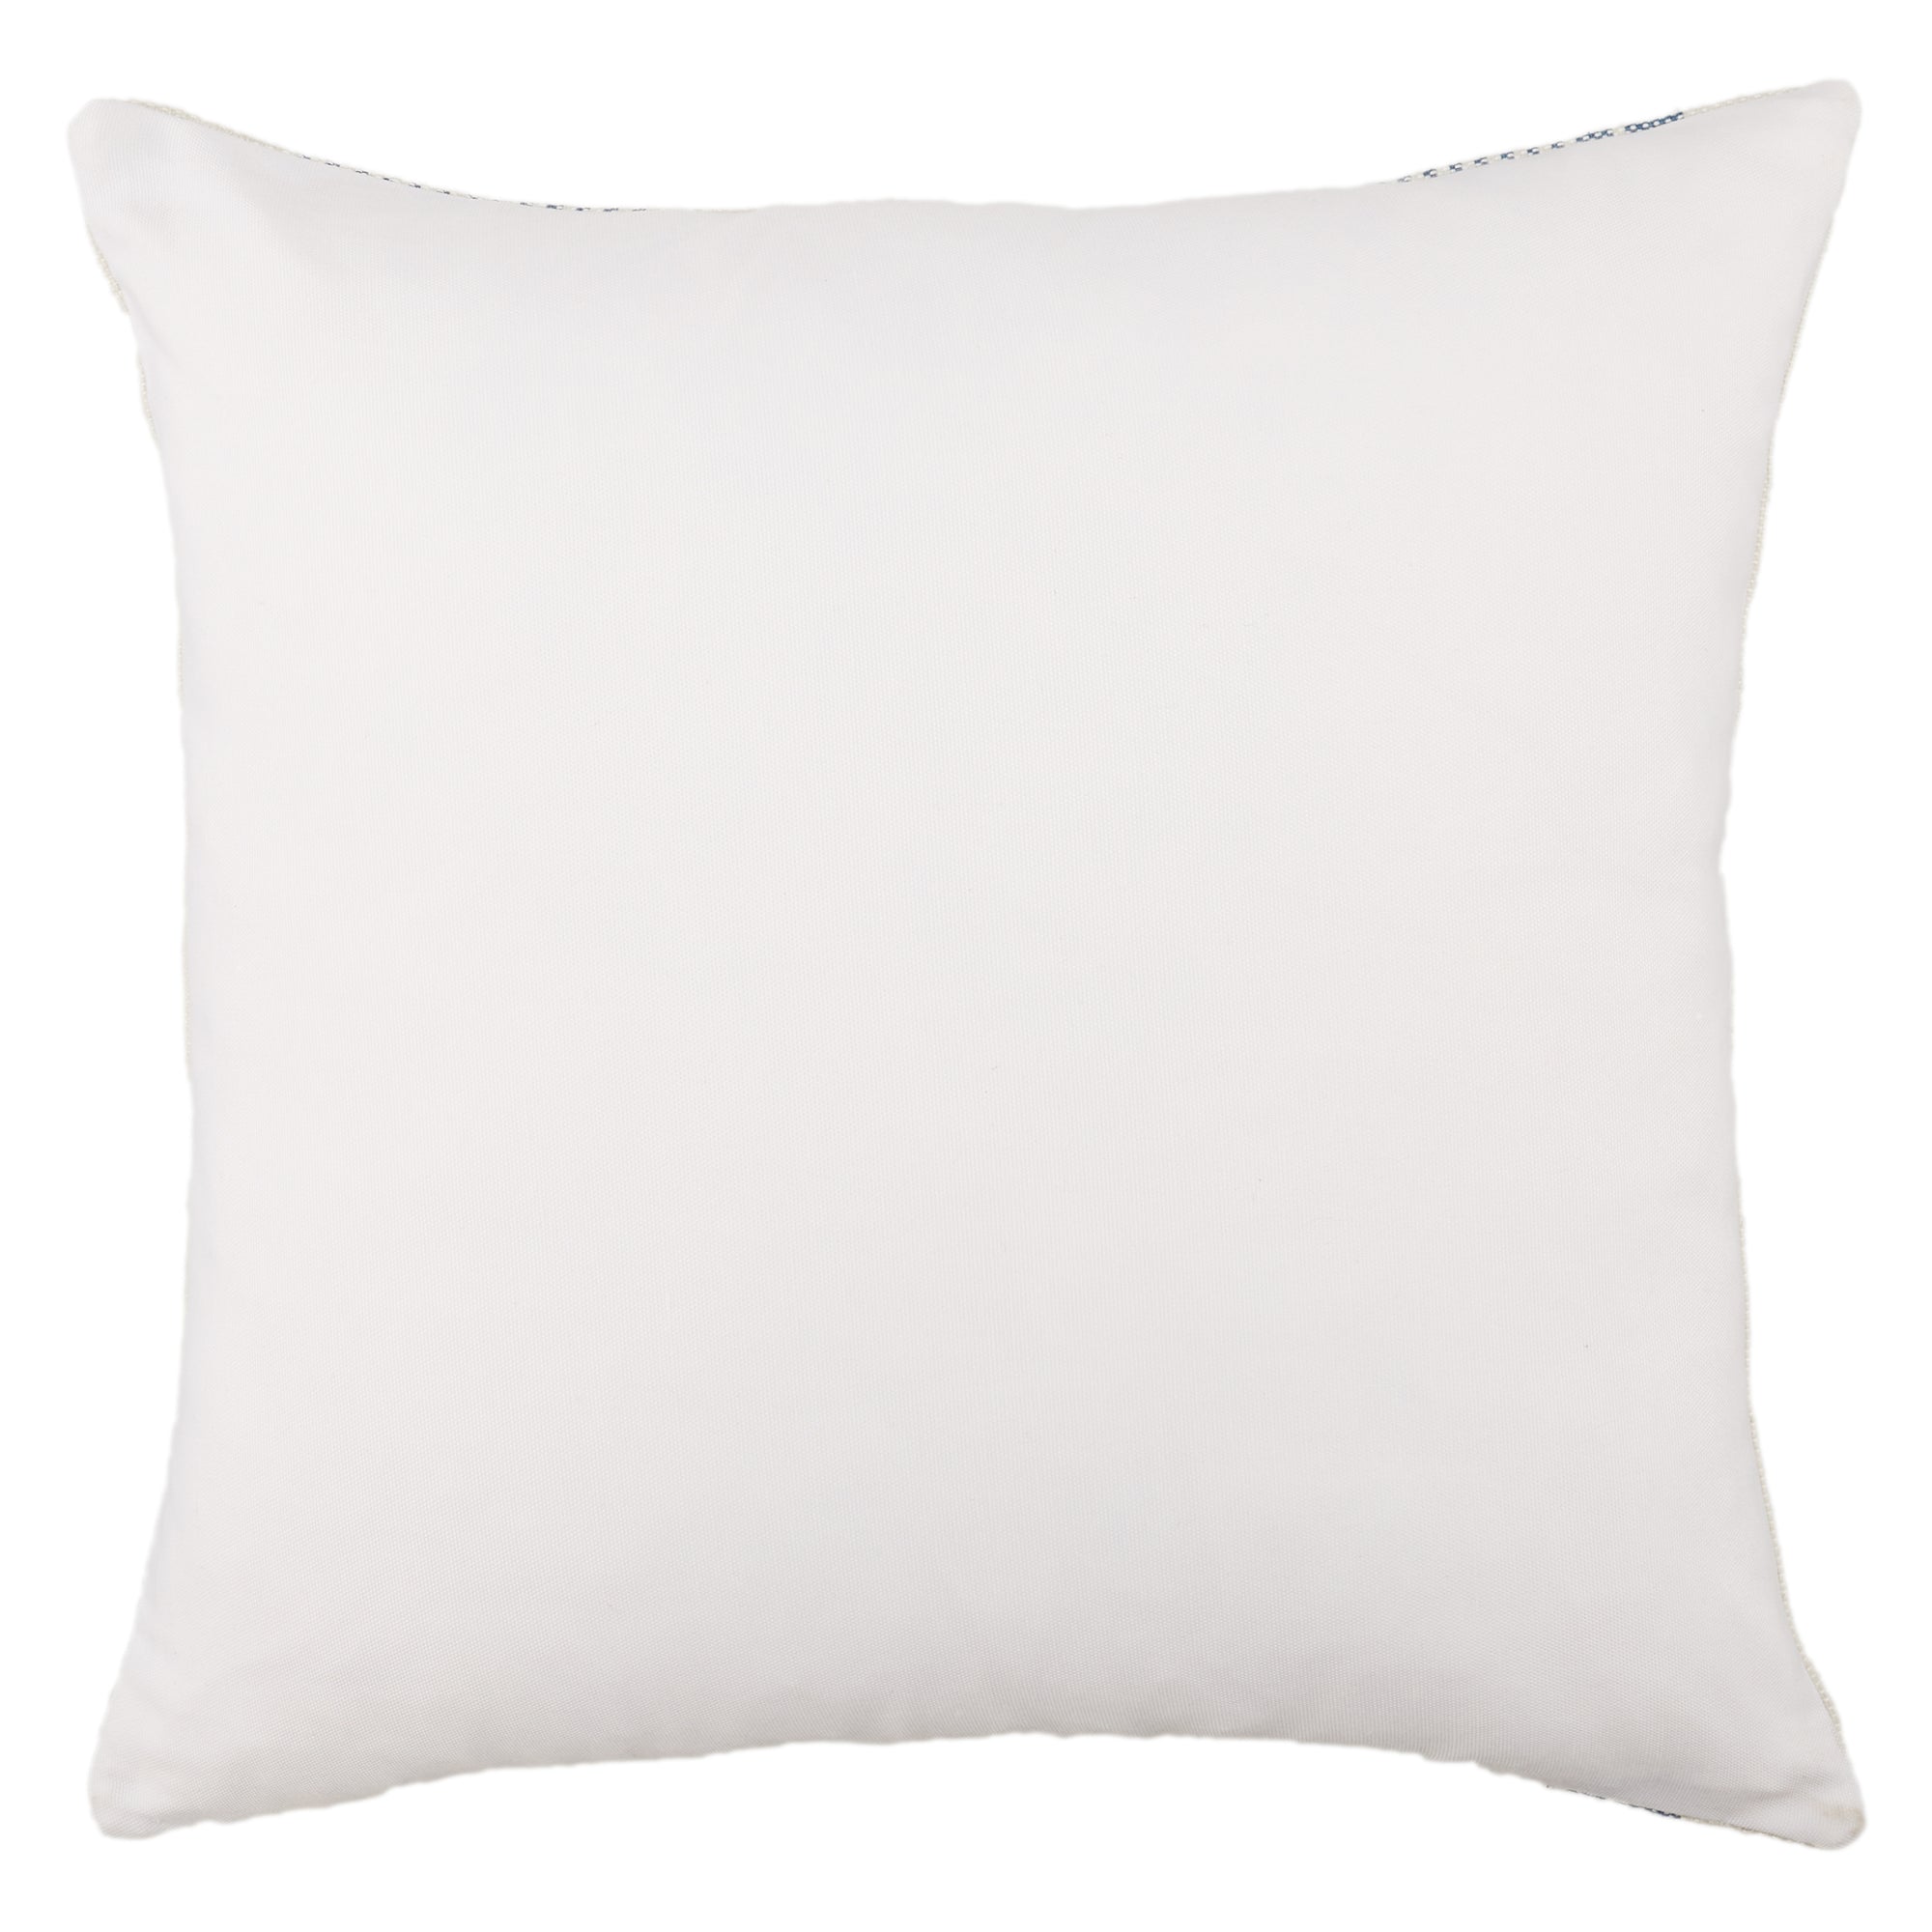 Jaipur Living Parque Outdoor Tan Ivory Striped Poly Fill Pillow